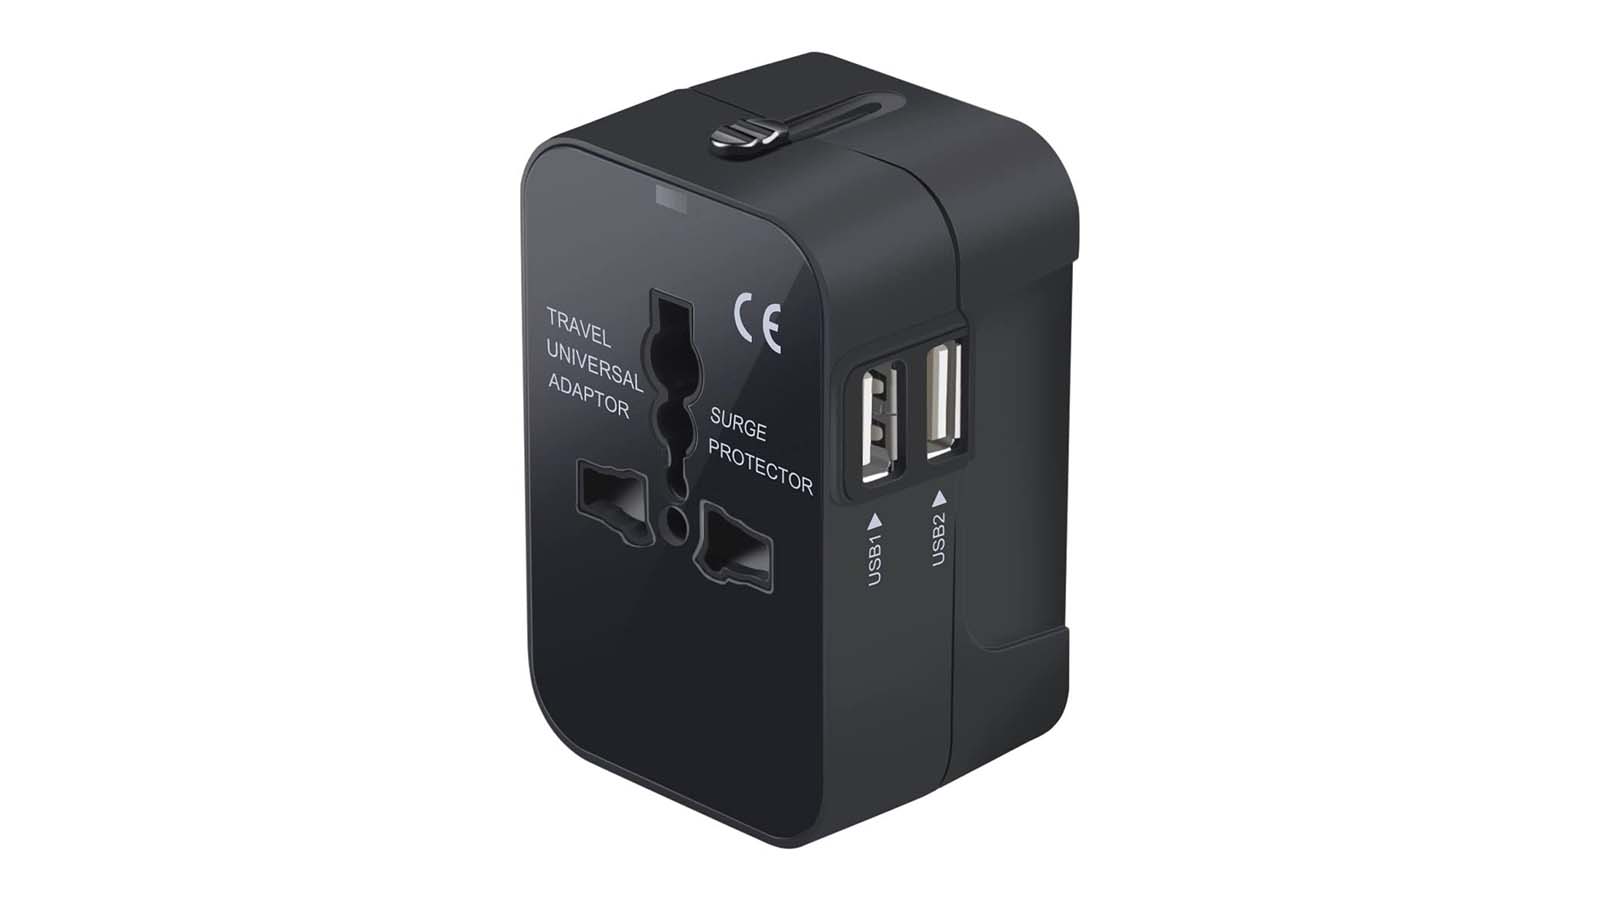 TESSAN All European UK Travel Plug Adapter Kit with 3 Outlet 3 USB Cha